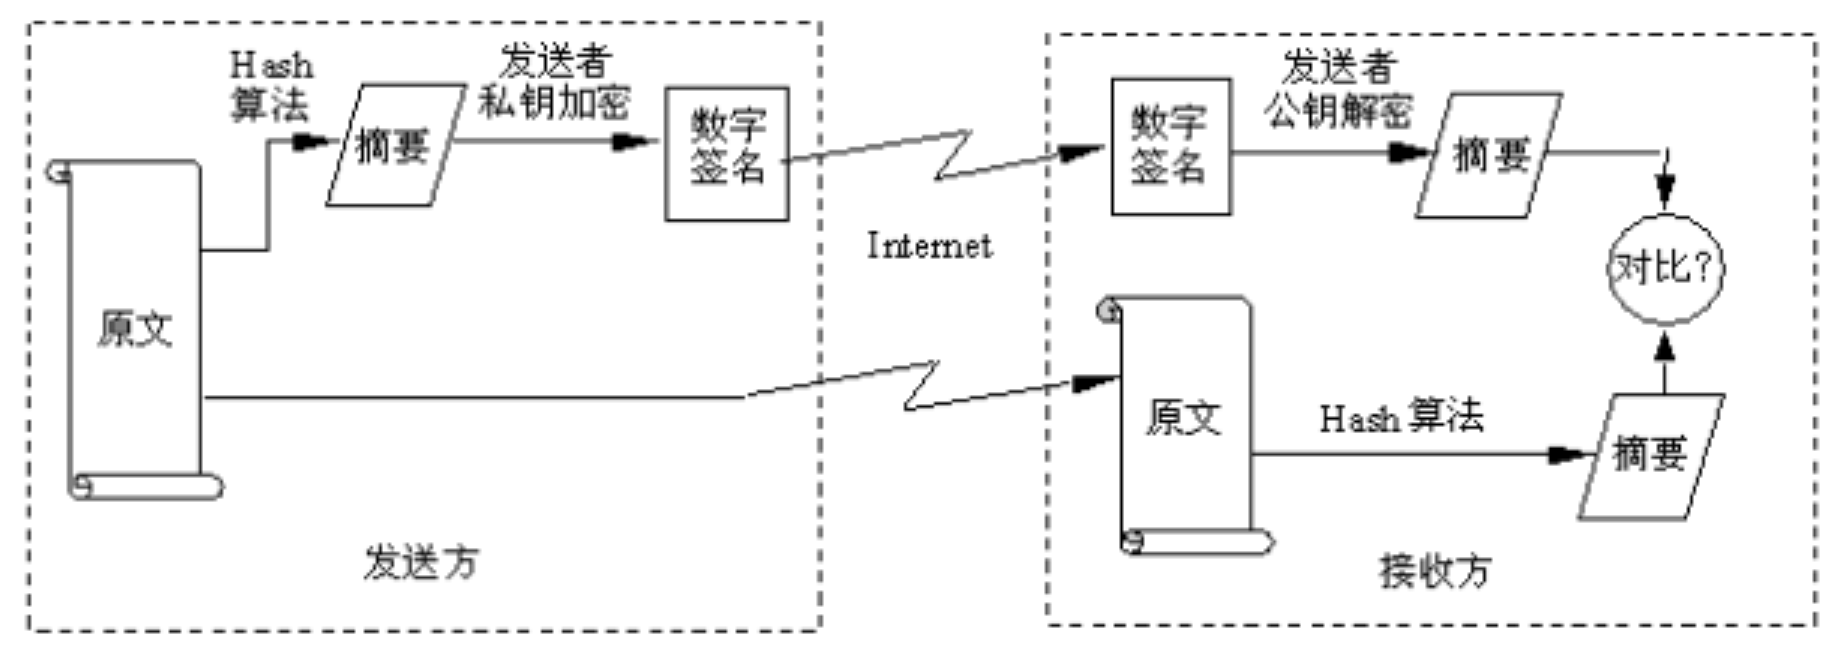 https://img.zhaoweiguo.com/knowledge/images/encrypts/digital_signature1.png